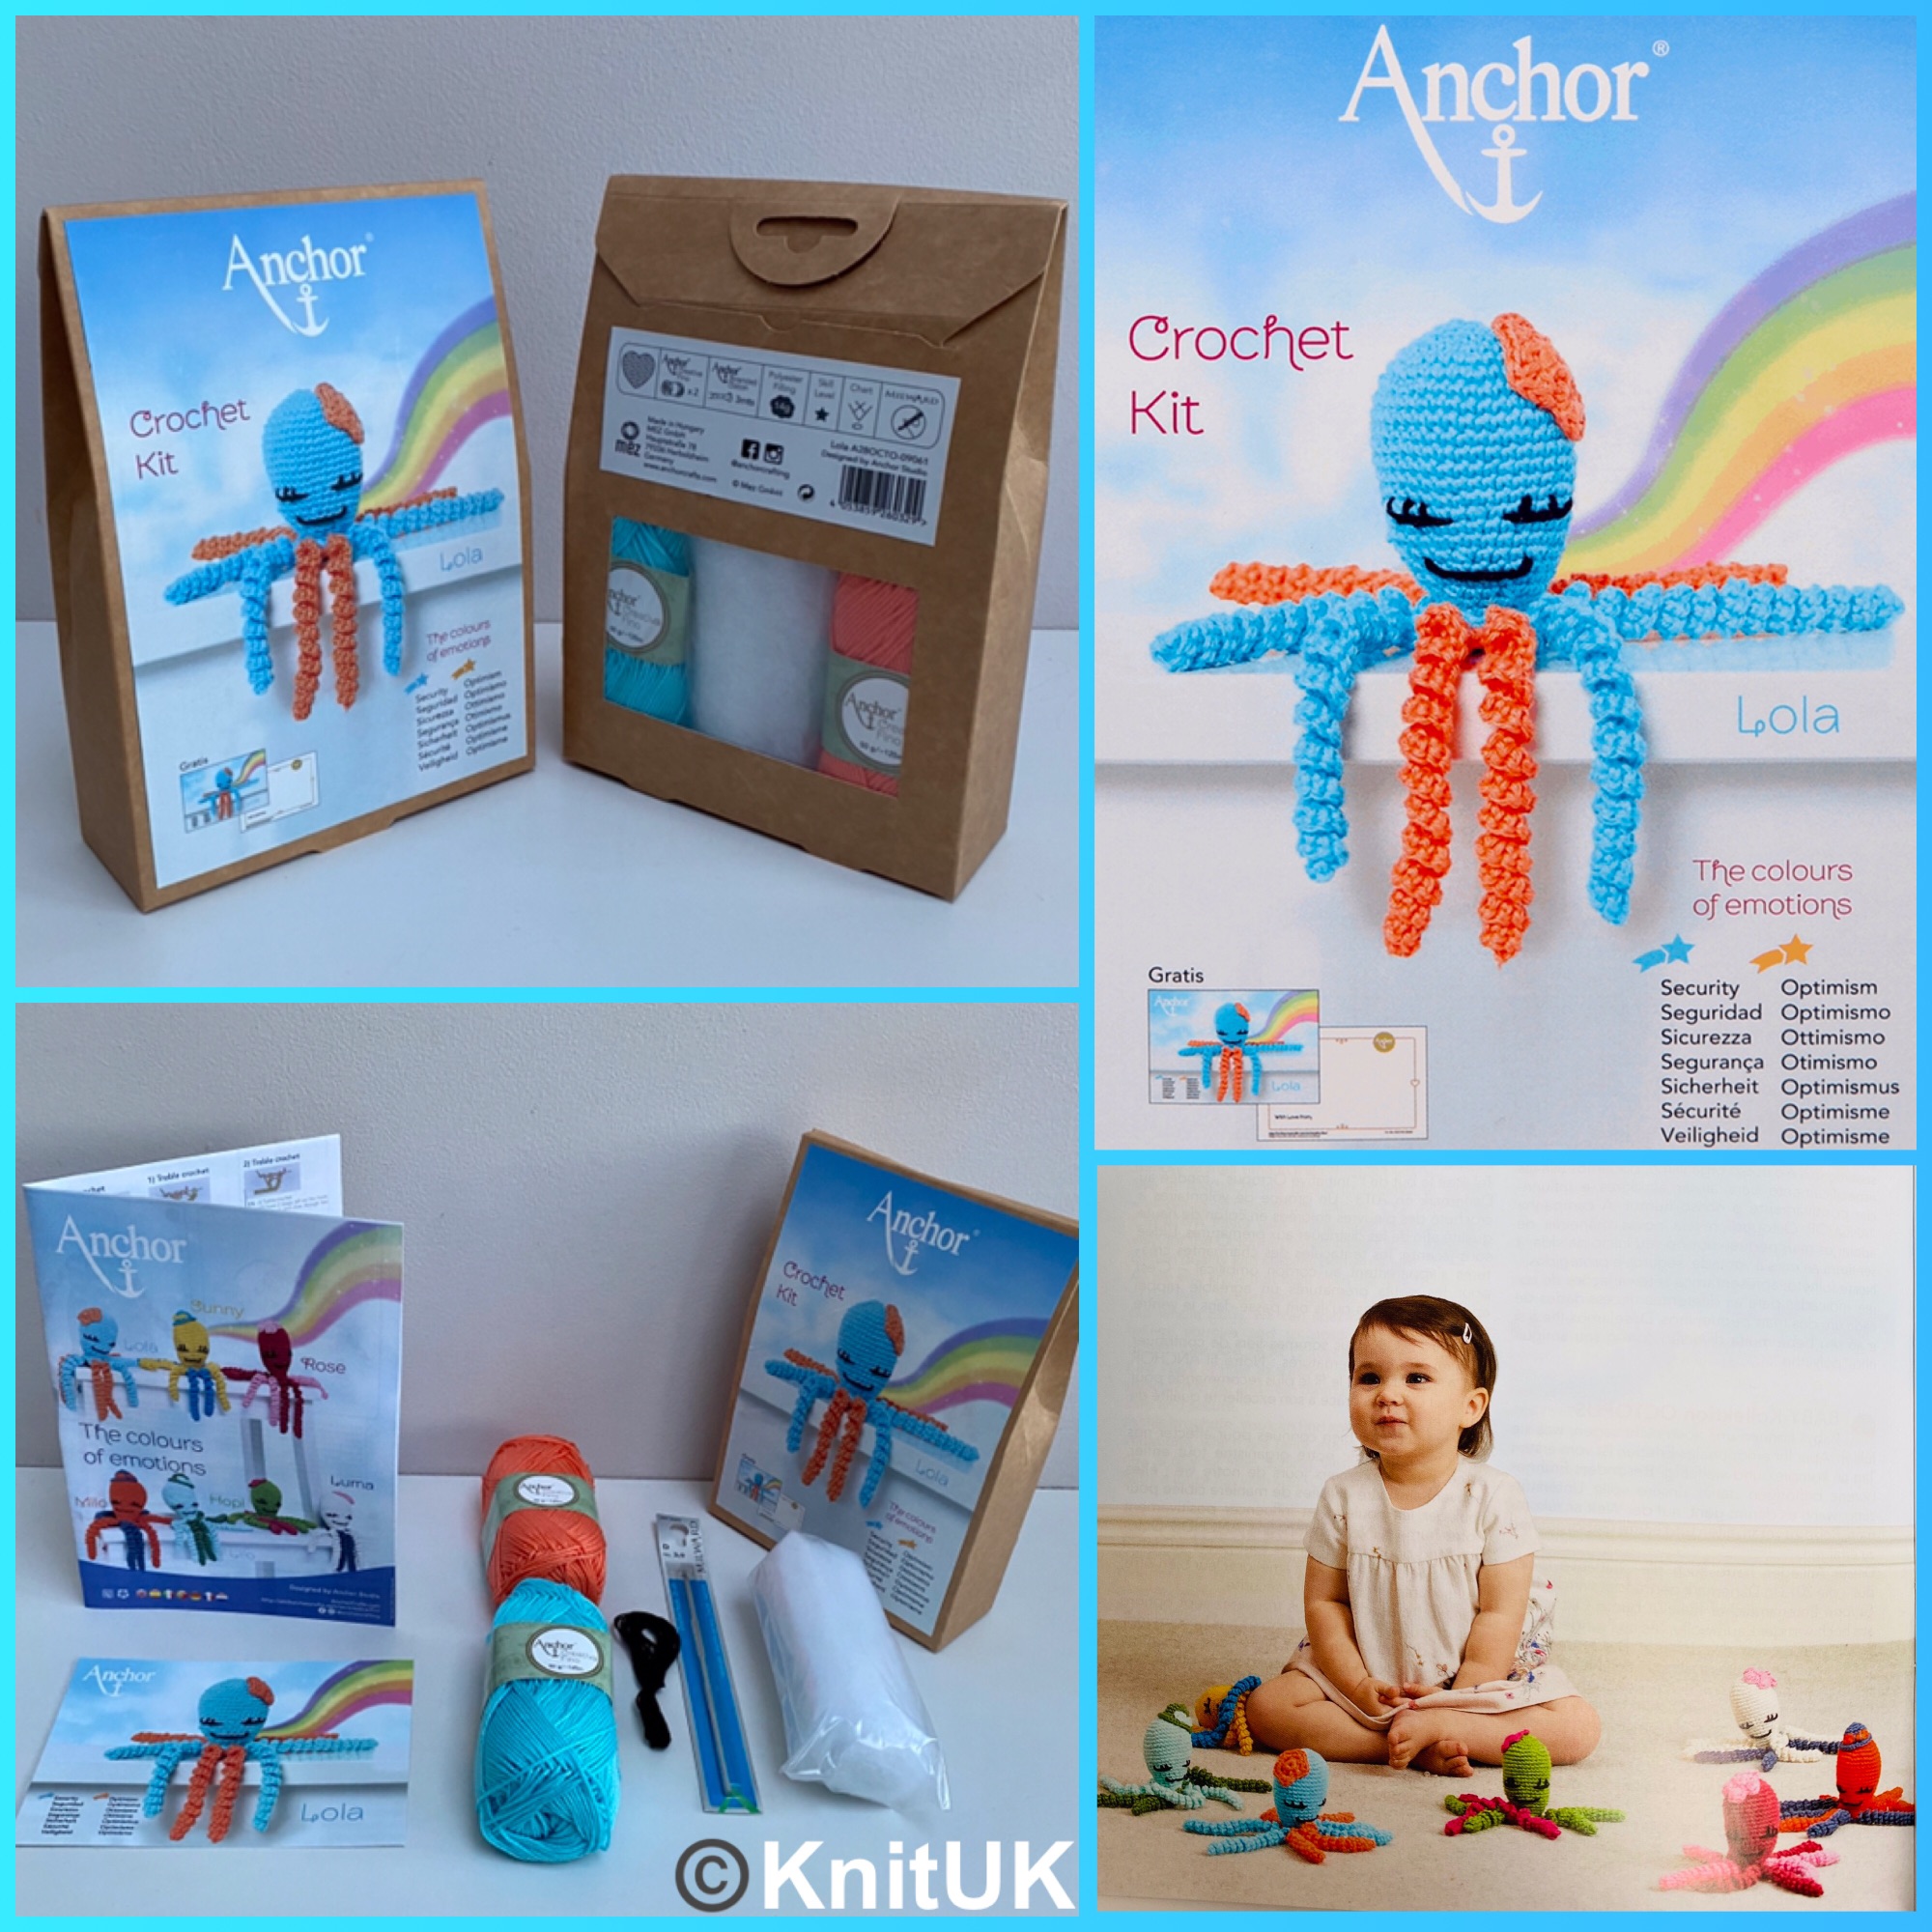 Anchor crochet kit octopus Lola the colours of emotions with turquoise peac